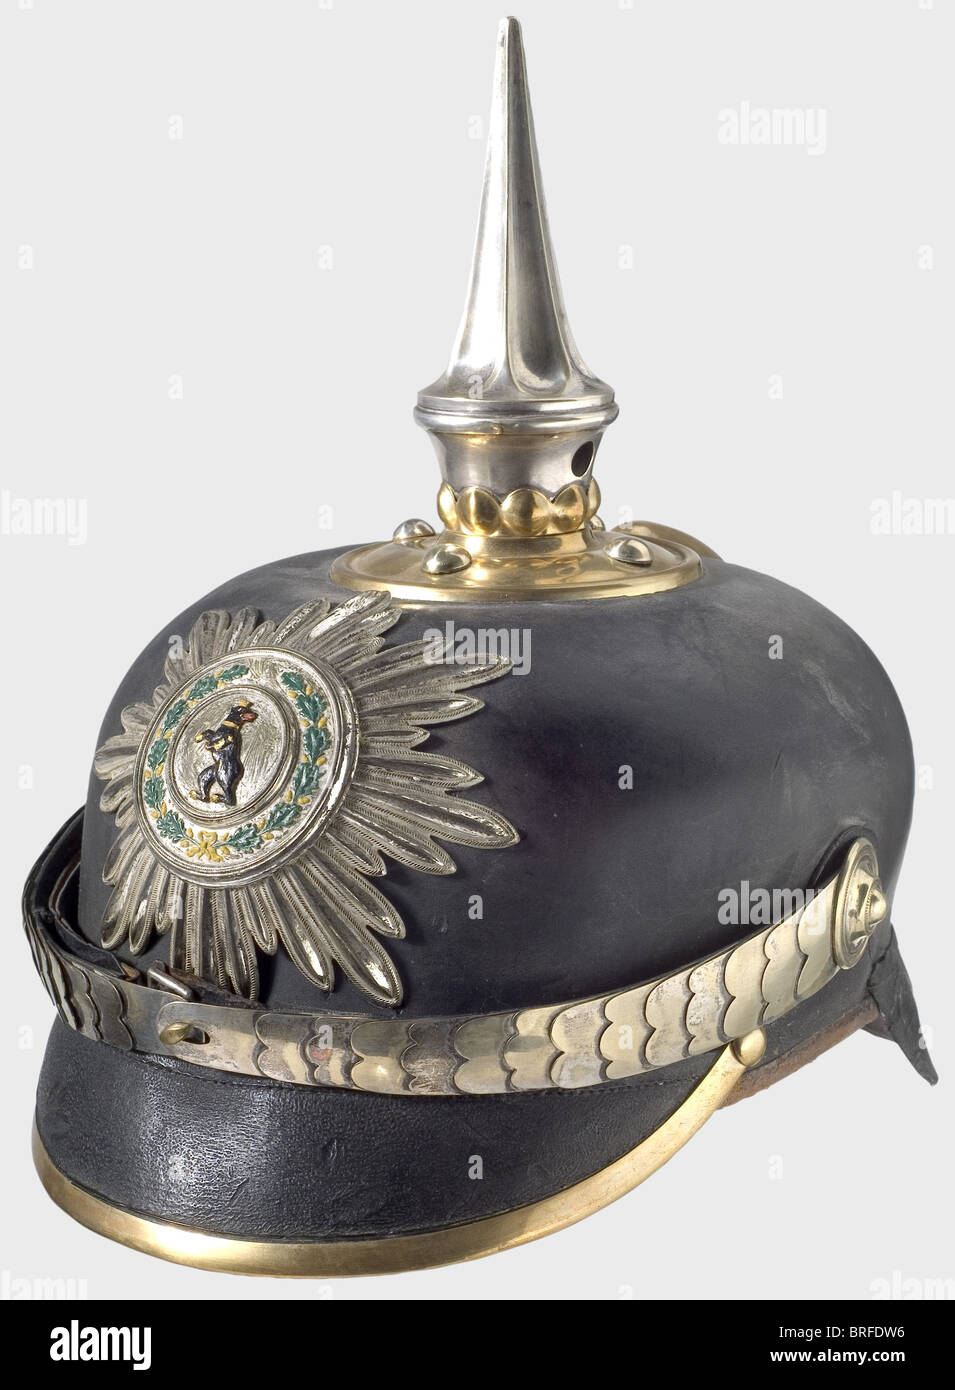 A helmet with unknown attribution., Leather skull with brass front and rear peak edging, round top plate, also of brass with a bead and reel frieze and round-headed screws. Silver-plated, fluted spike, metal chinscales, and a star emblem. On the silver medallion a rampant heraldic bear within a colour painted oak leaf wreath. Brown ribbed silk lining. Maker's label. Size 56. A fruitless search has already been made for the identification of a similar helmet in 1976/77 in the Orden Militaria Journal 17, 18, and 19. It may possibly be a police helmet. historic, h, Stock Photo